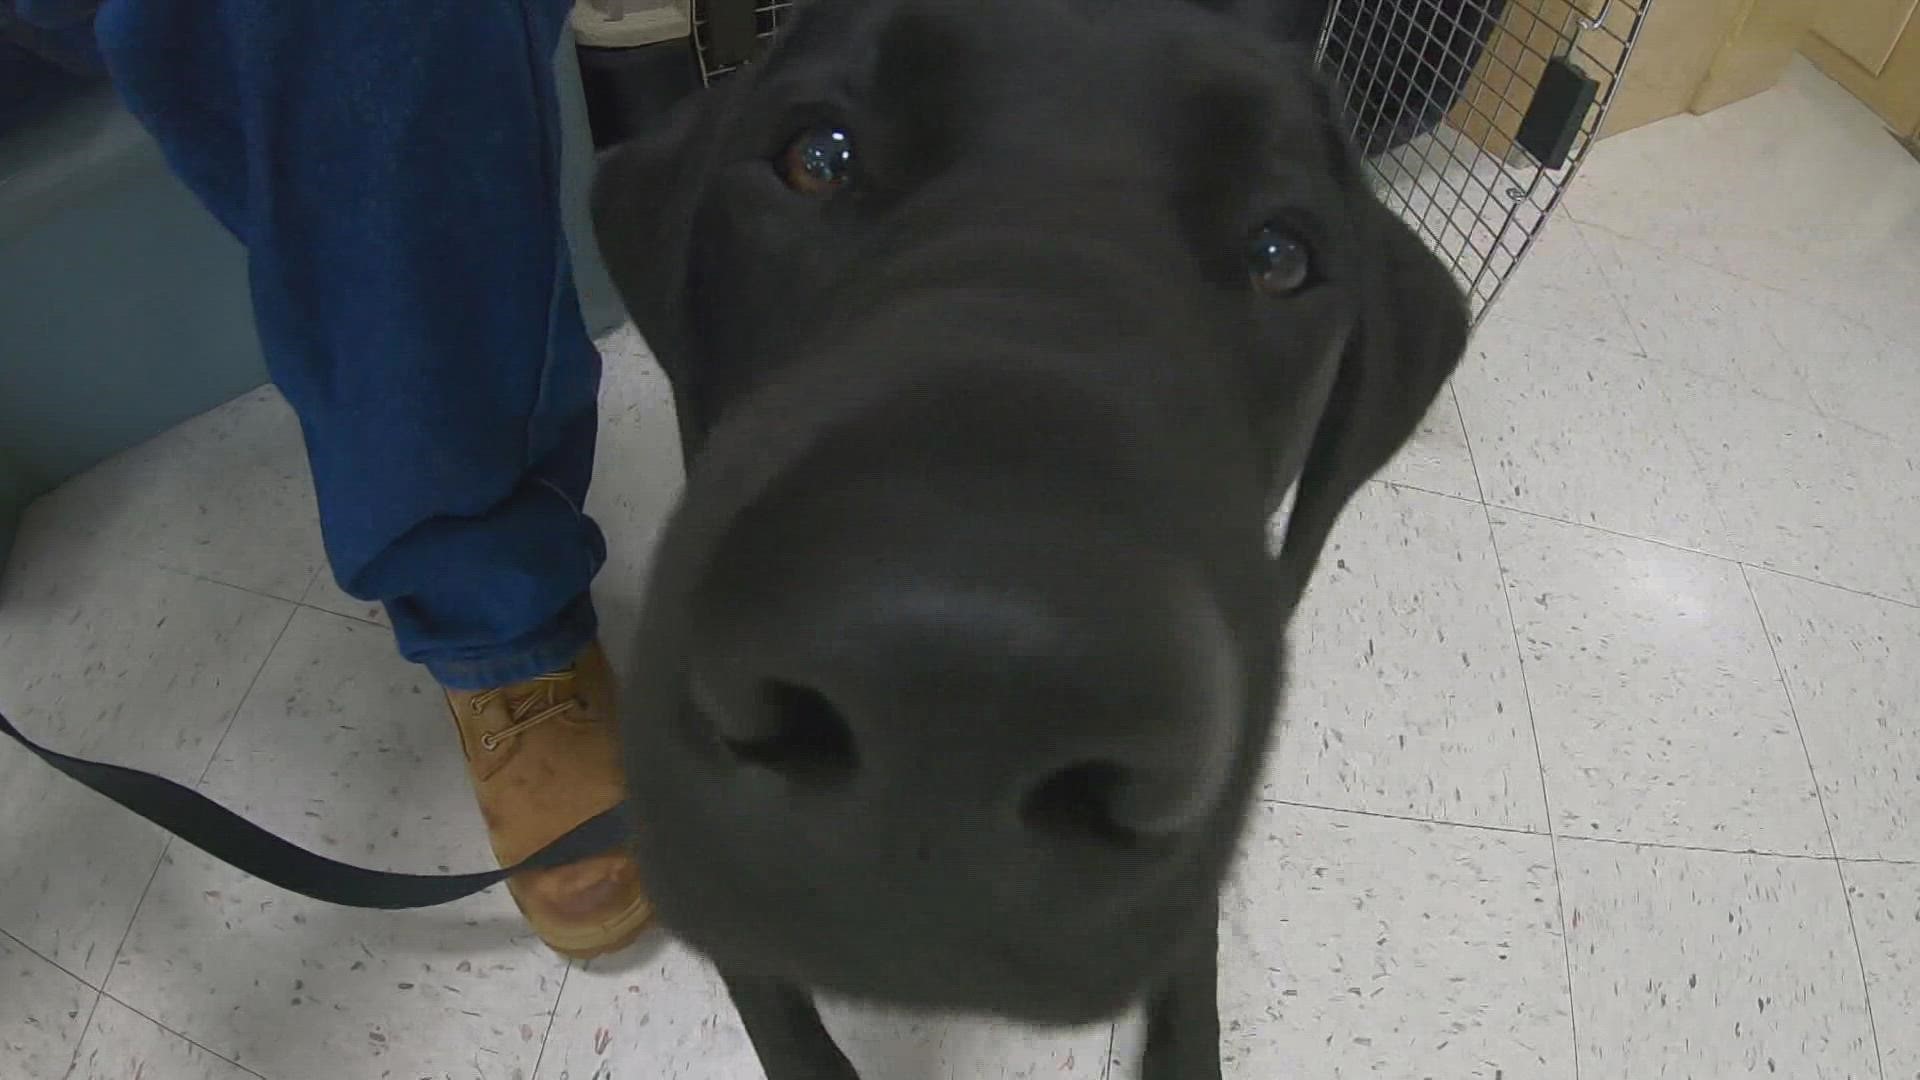 The national nonprofit America's VetDogs has been at the Maine State Prison since 2017. Organizers say they're in need of volunteers who live near the Warren area.